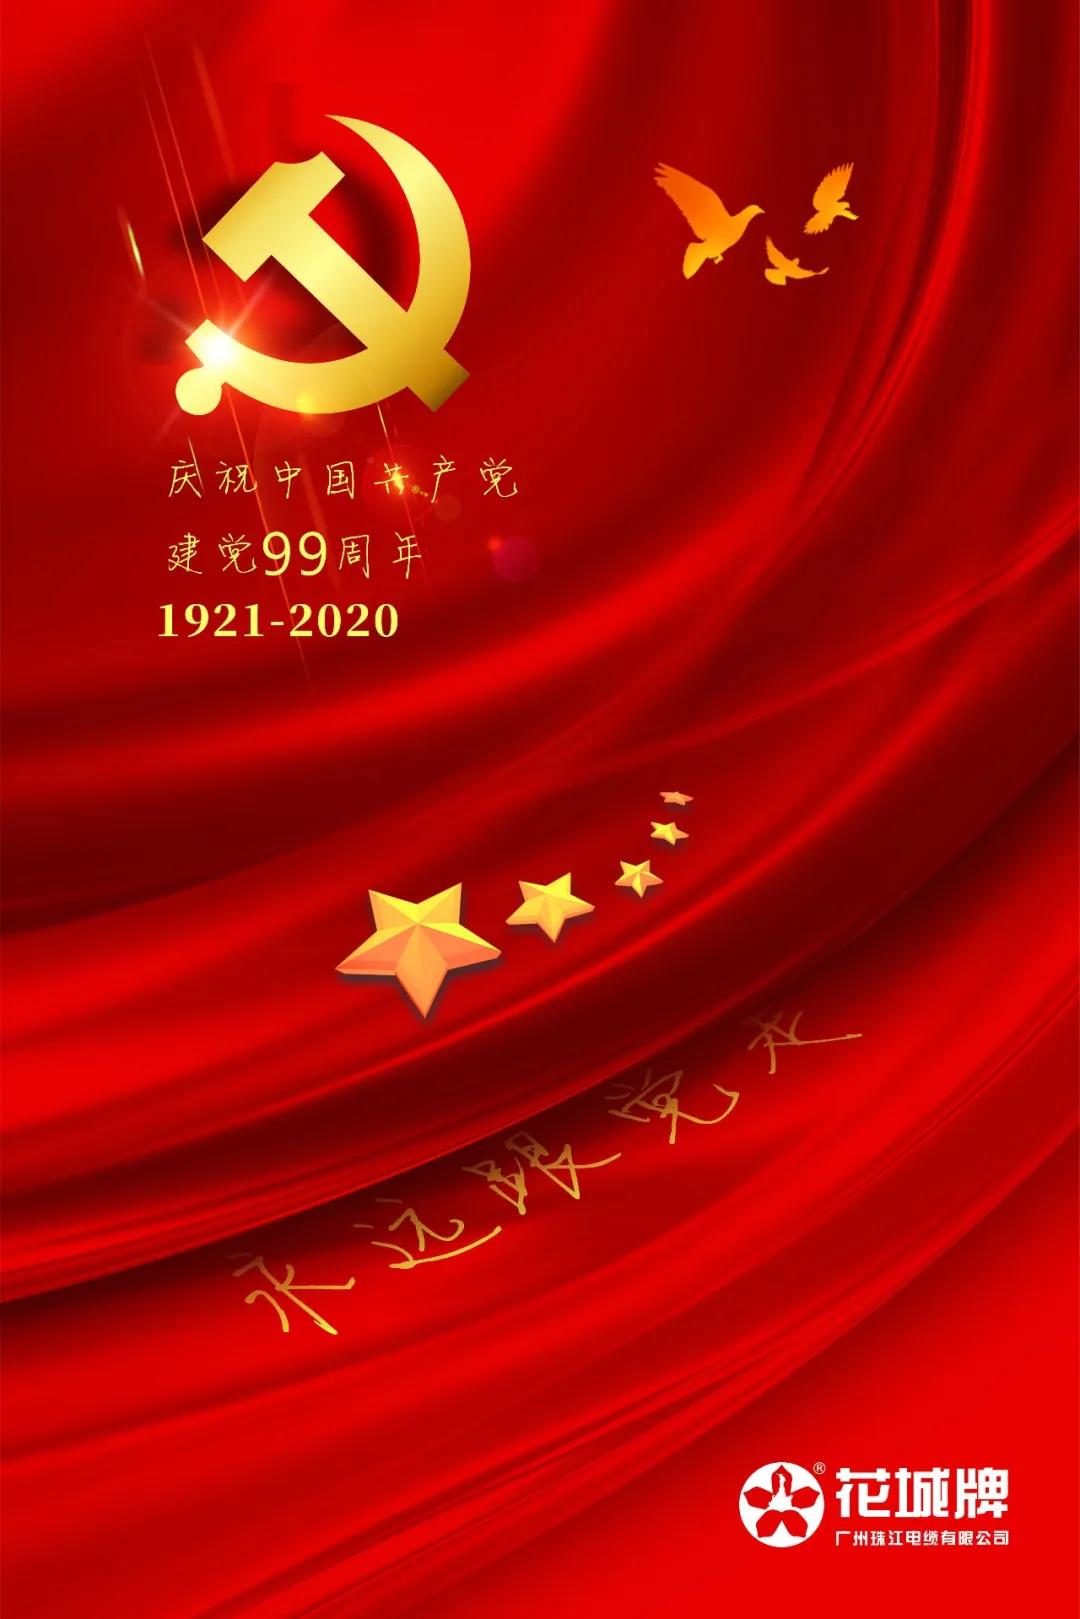 Do not forget the original intention丨The 99th anniversary of the founding of the party!